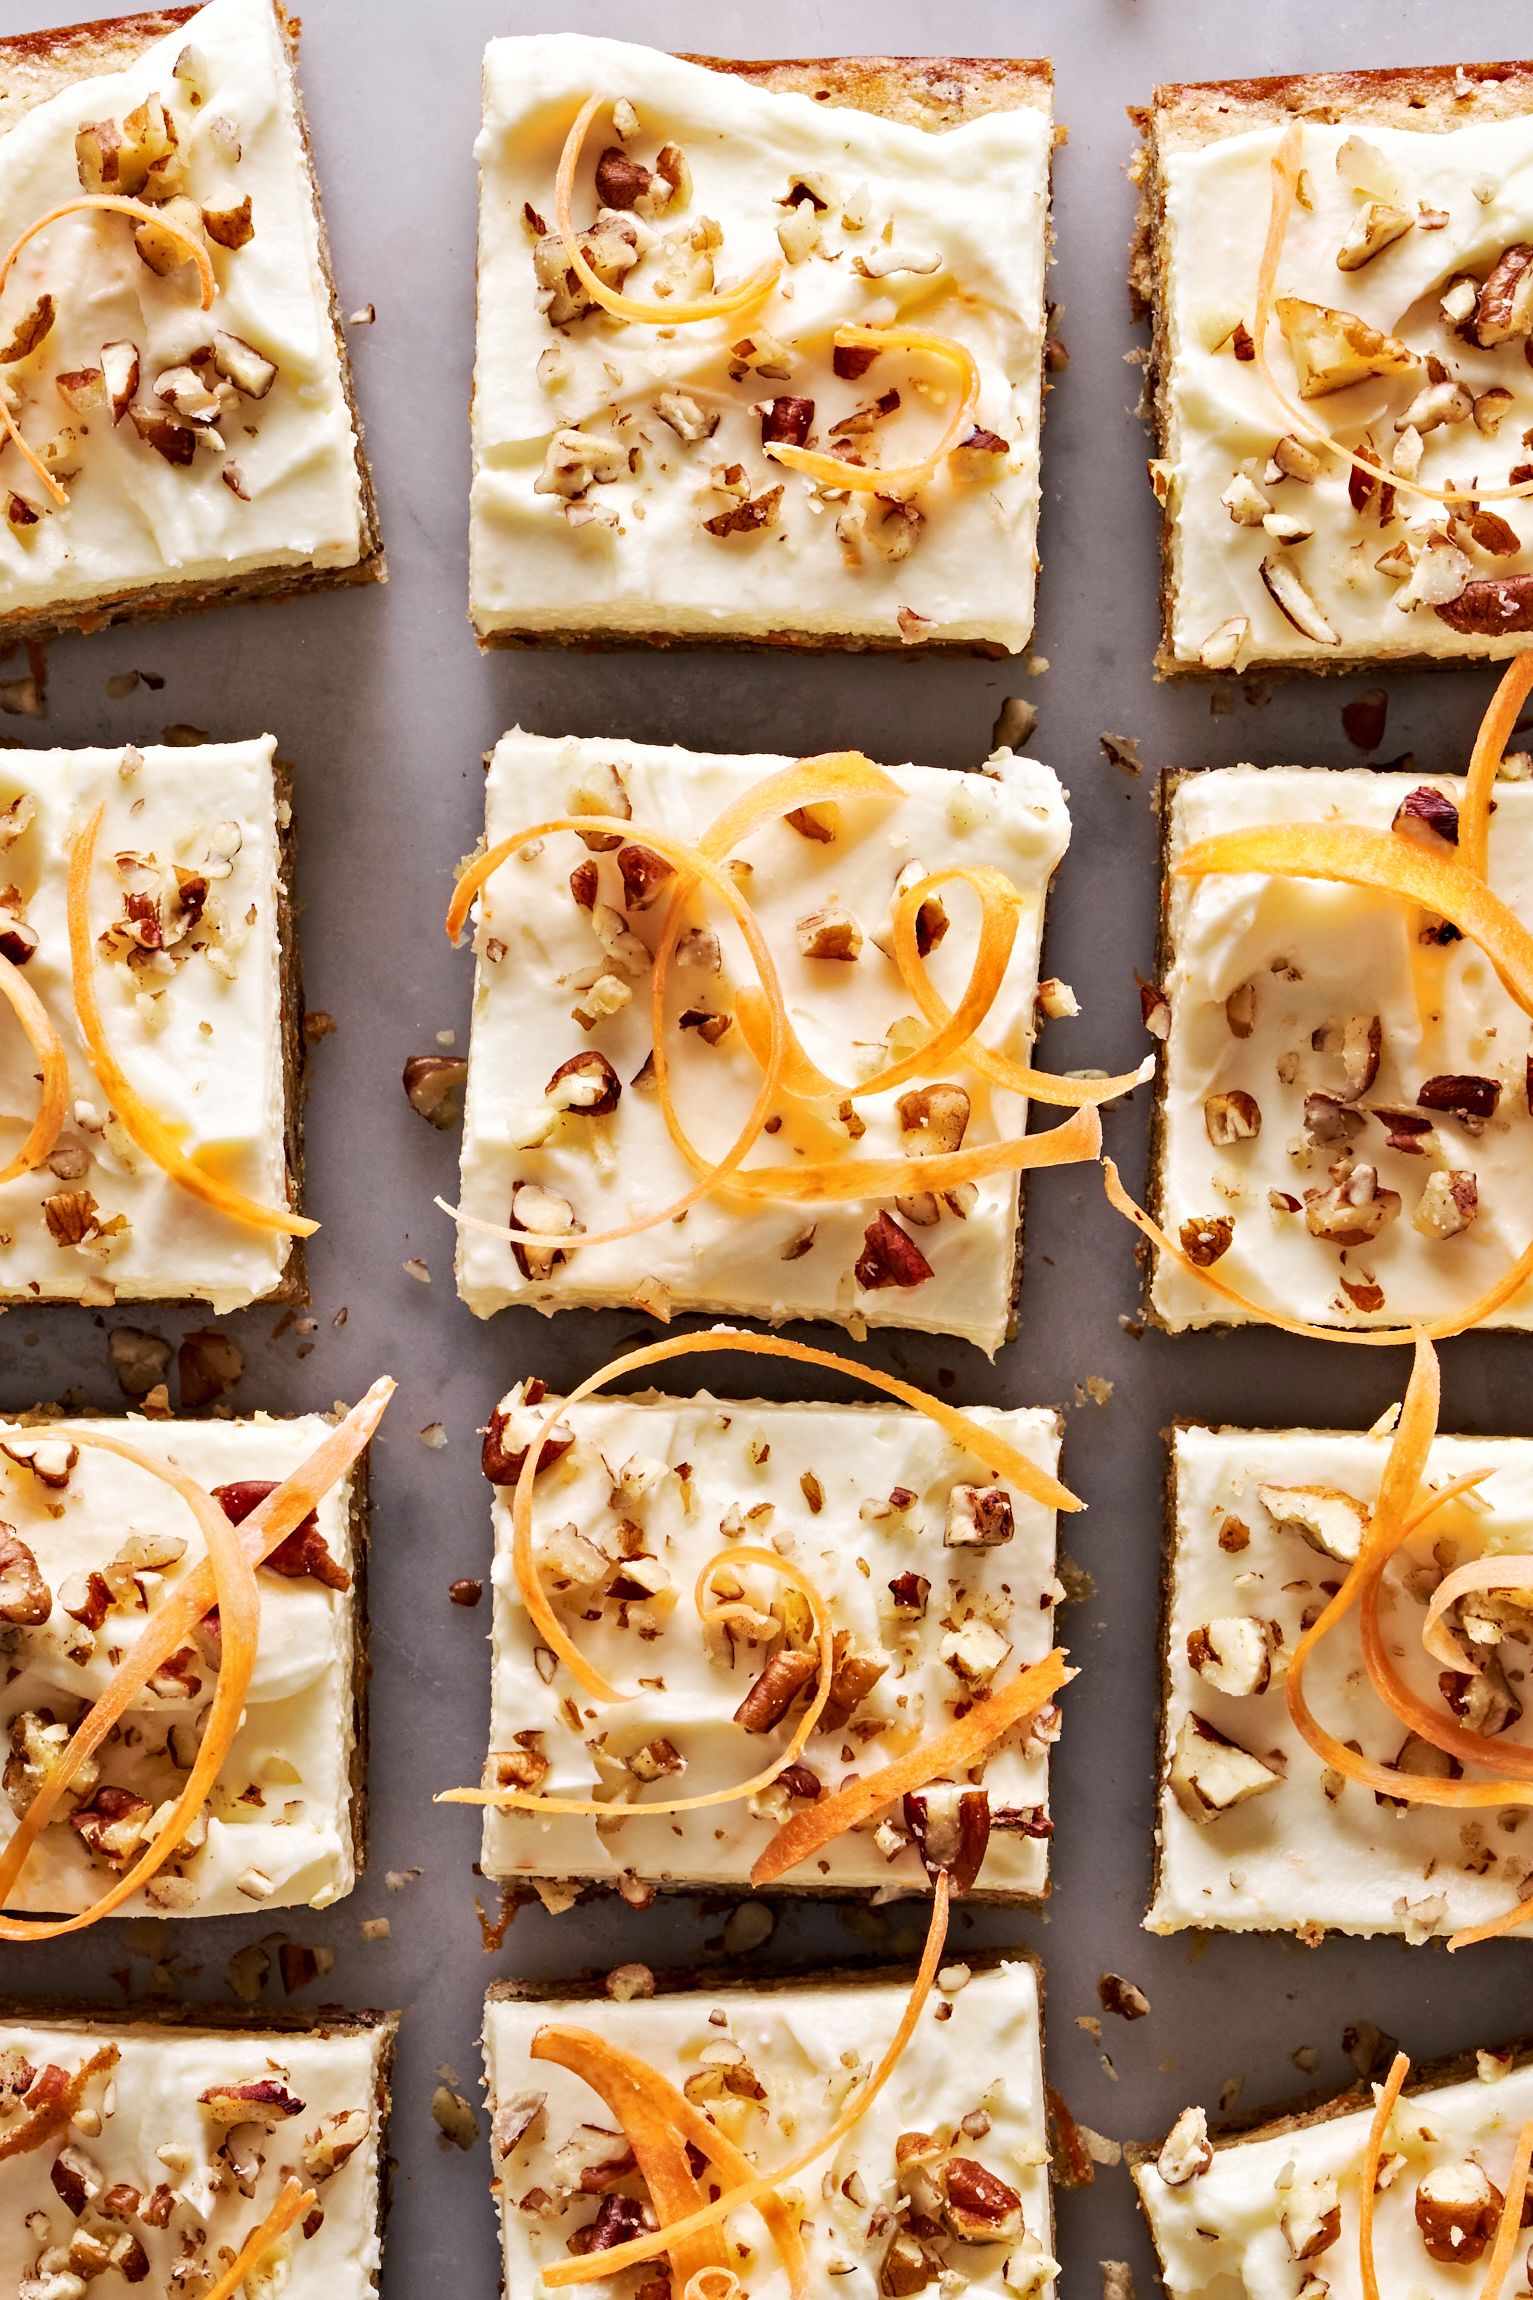 Maple Pecan Blondie Torte with Maple Cream Cheese Frosting